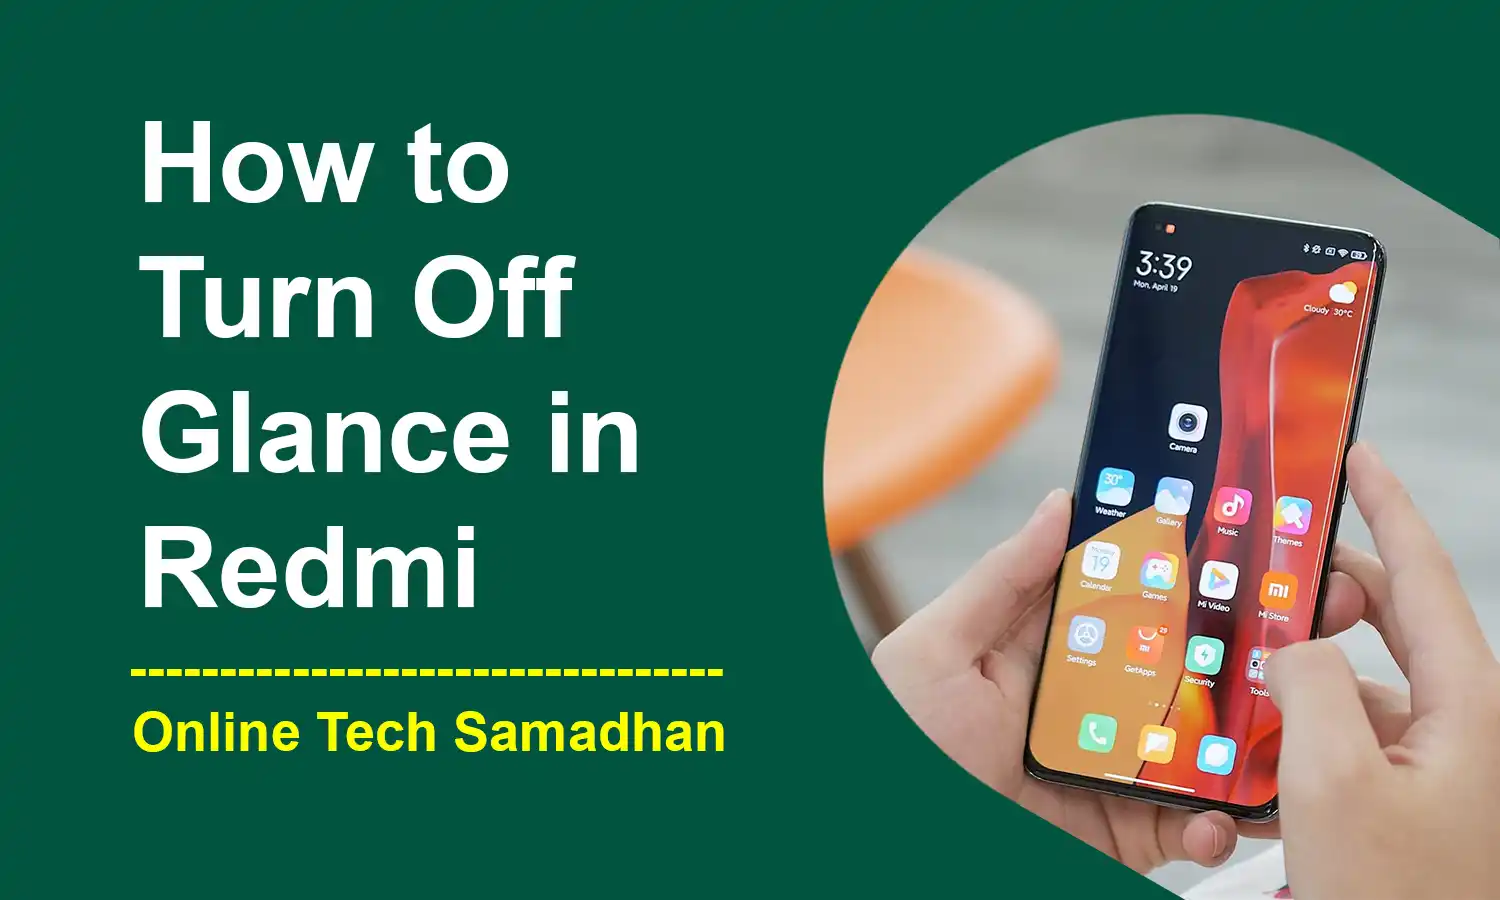 How to Turn Off Glance in Redmi